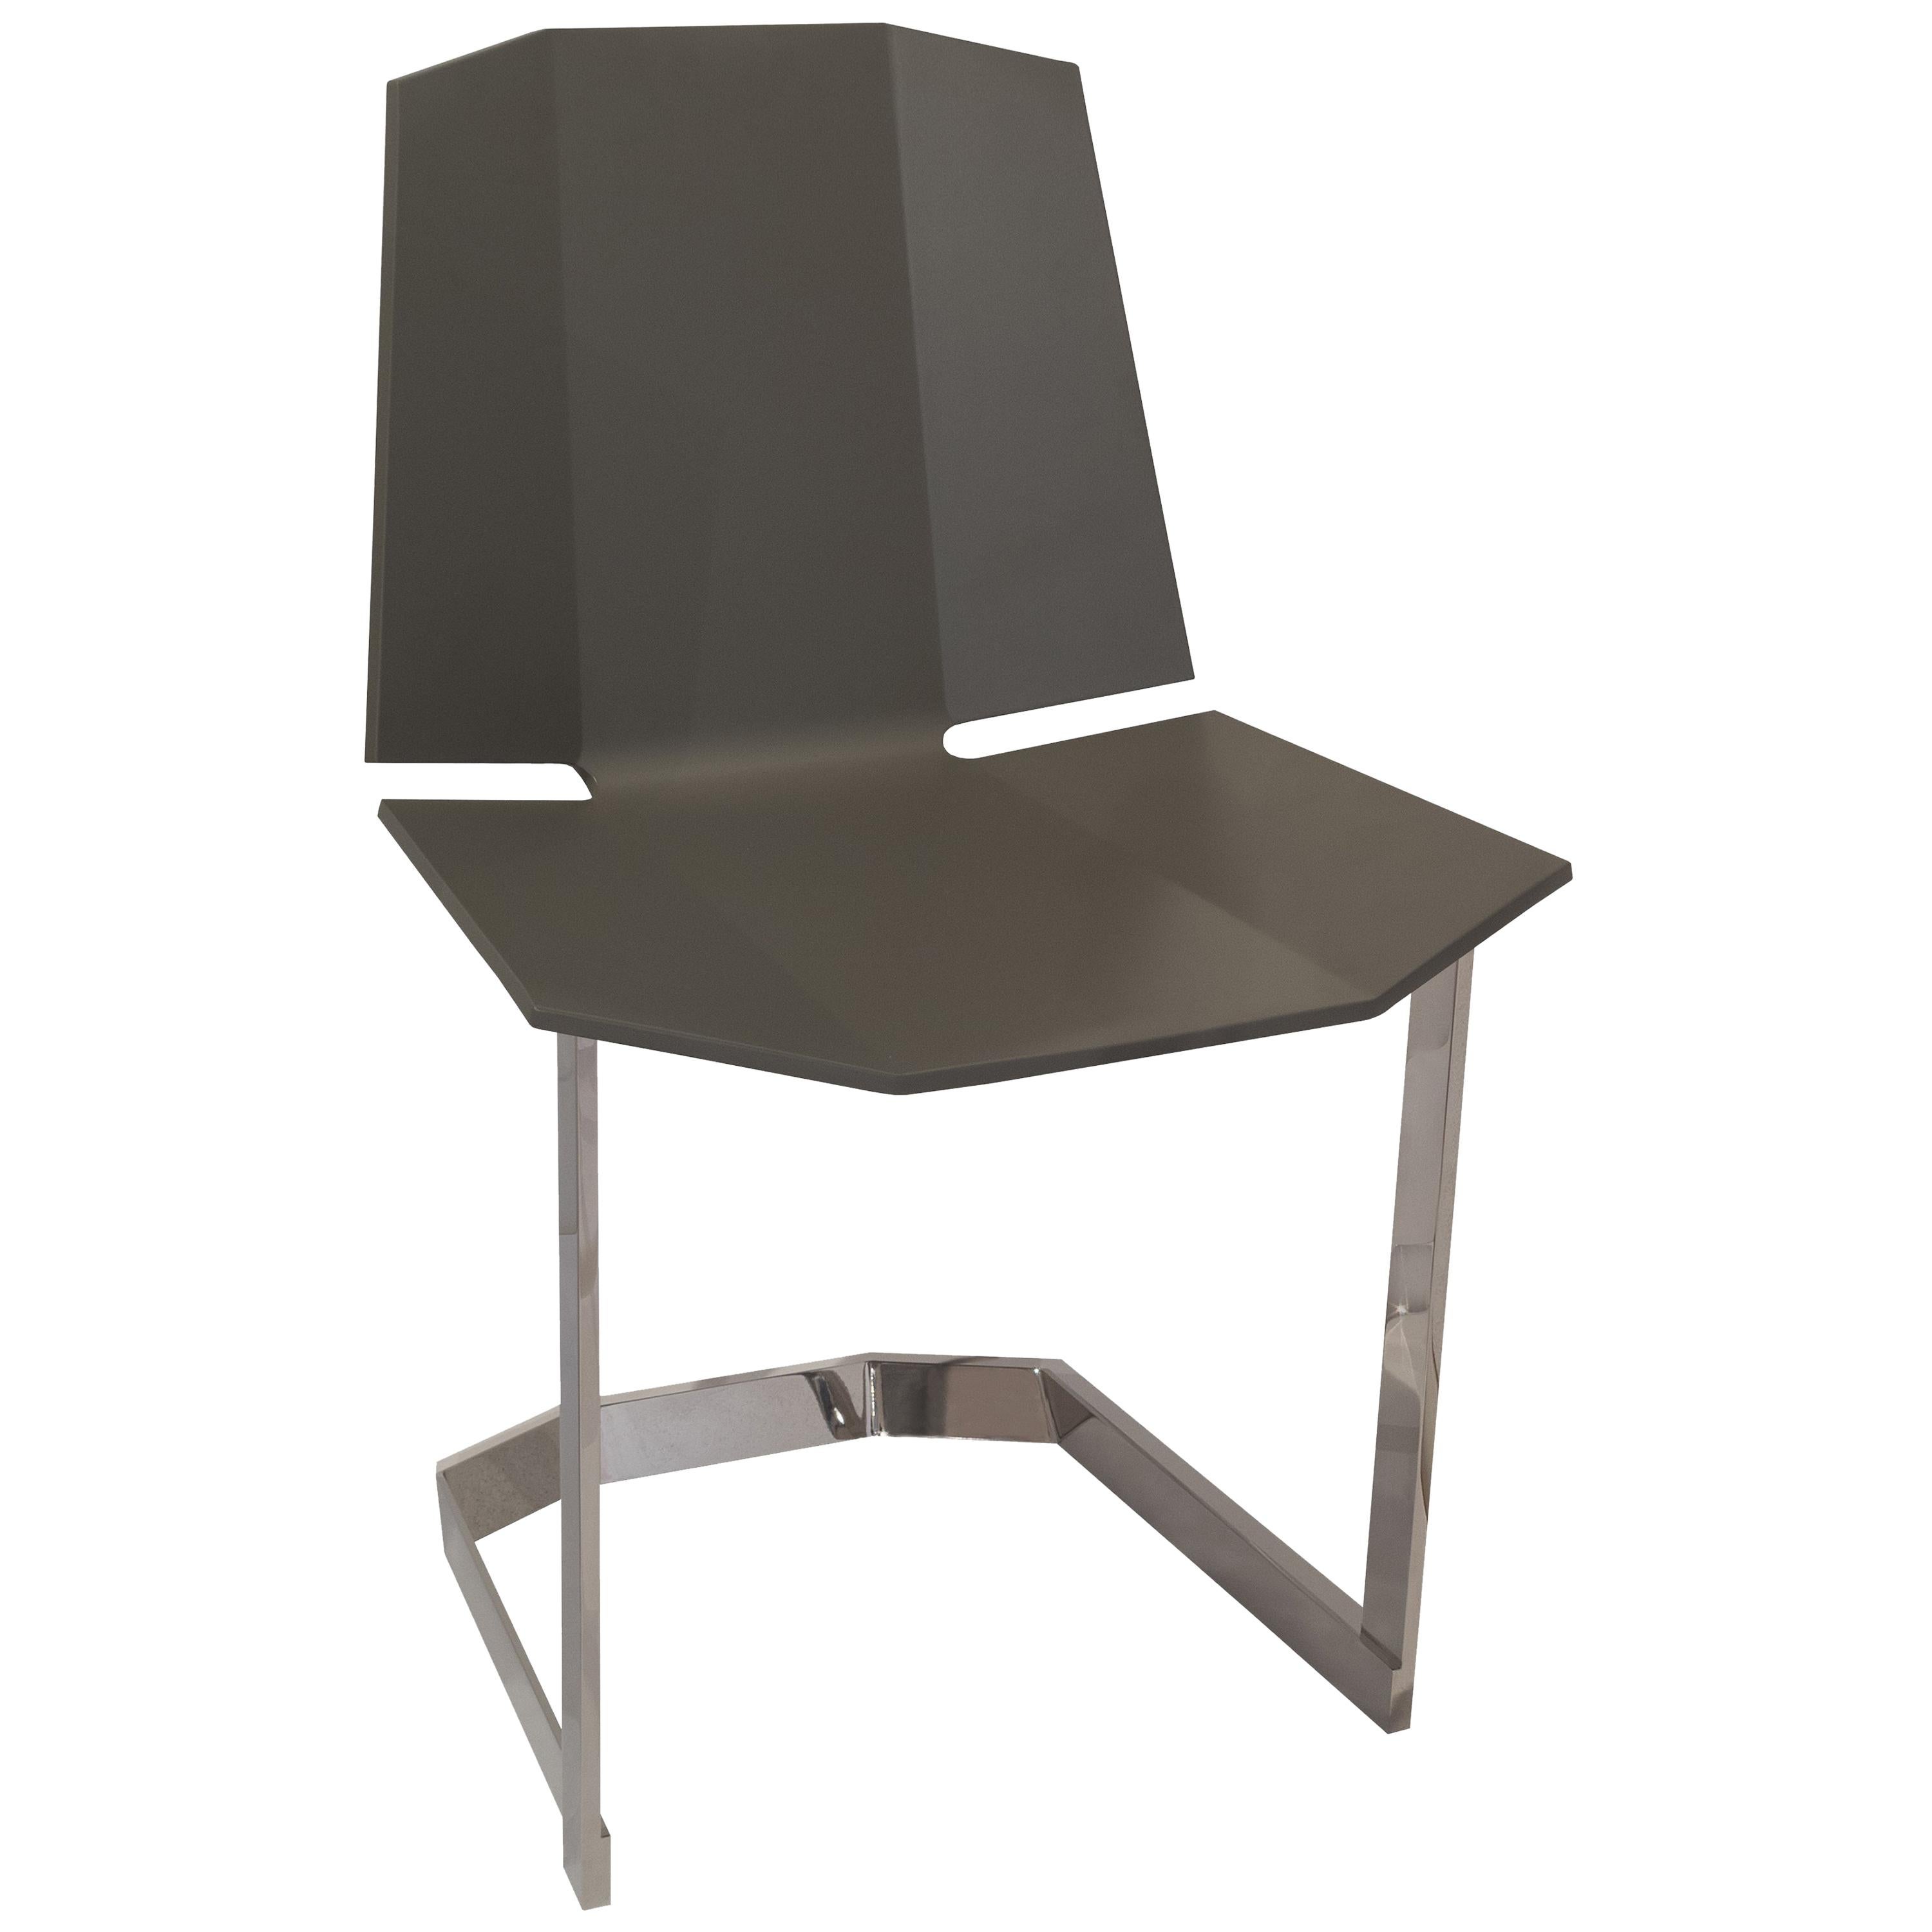 Donghia Rex Occasional Chair in Truffle Lacquer im Angebot